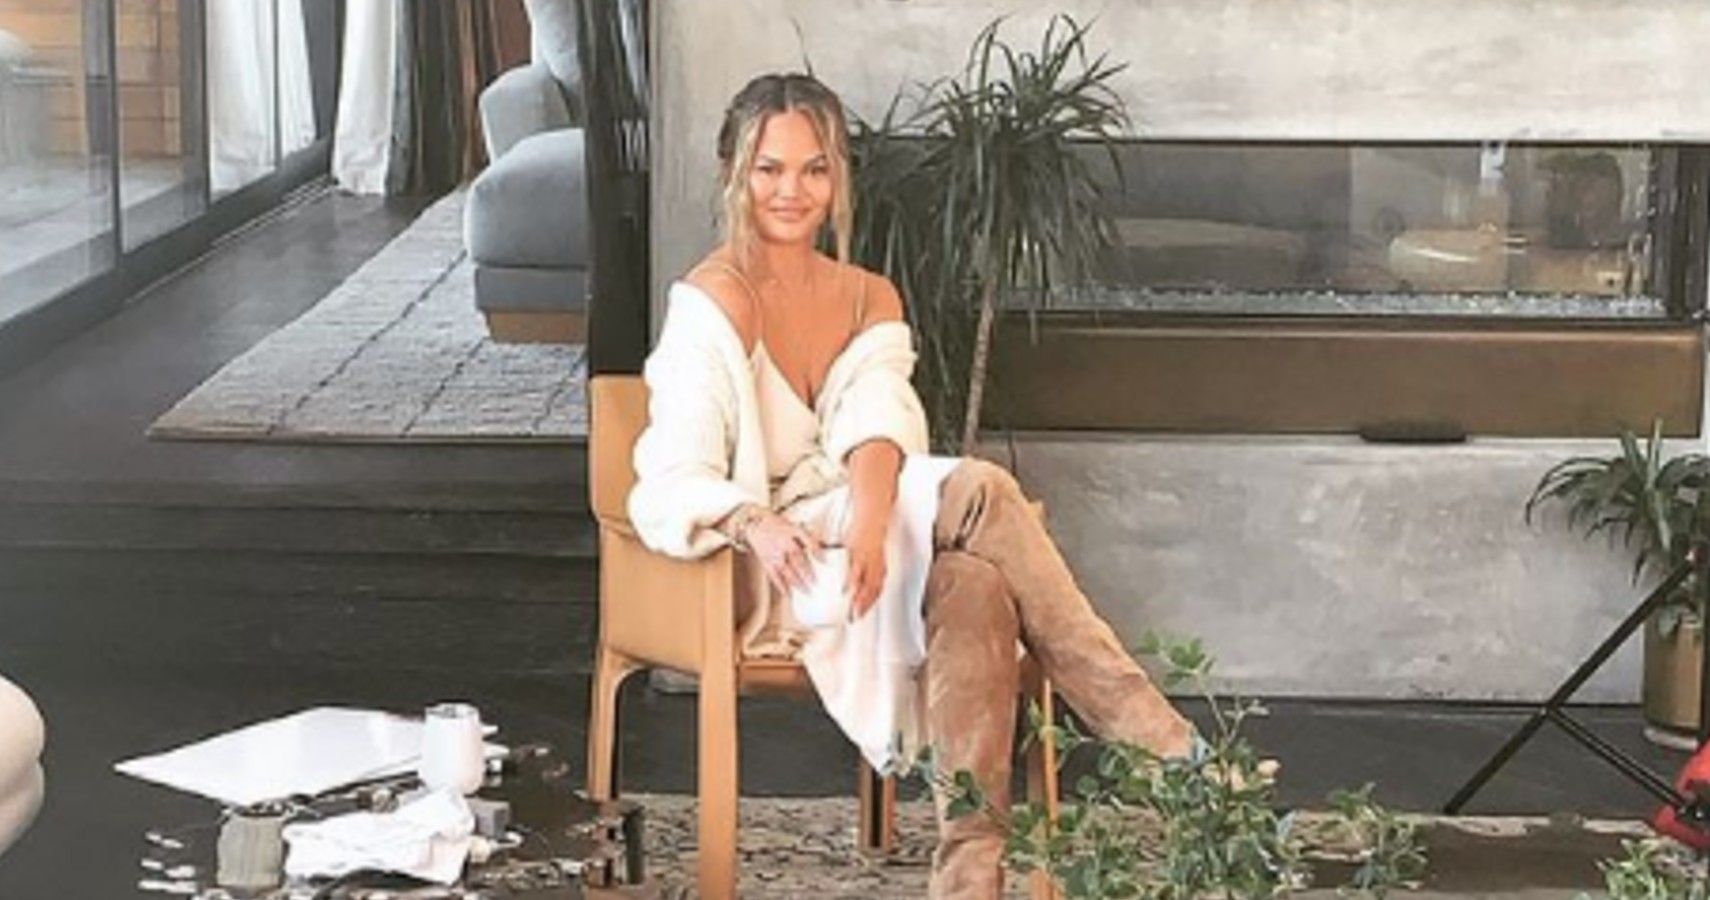 Chrissy Teigen Pens Note After Fans Attack Her For Saying She Has 'Nothing' After Loss